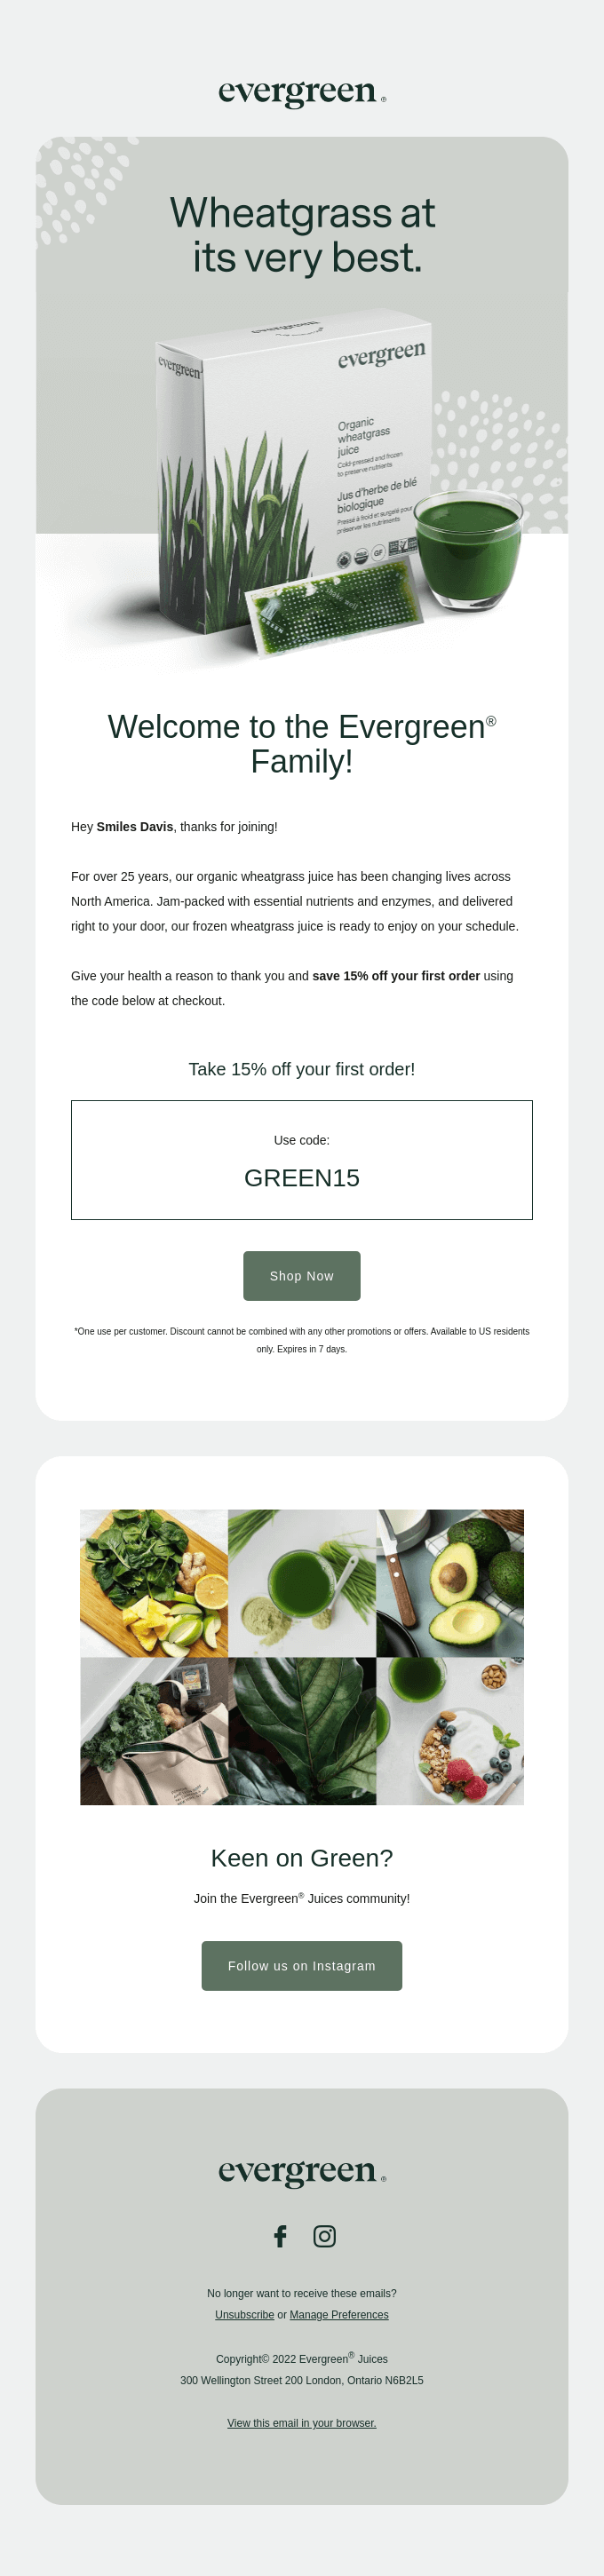 Welcome email with promo code from Evergreen